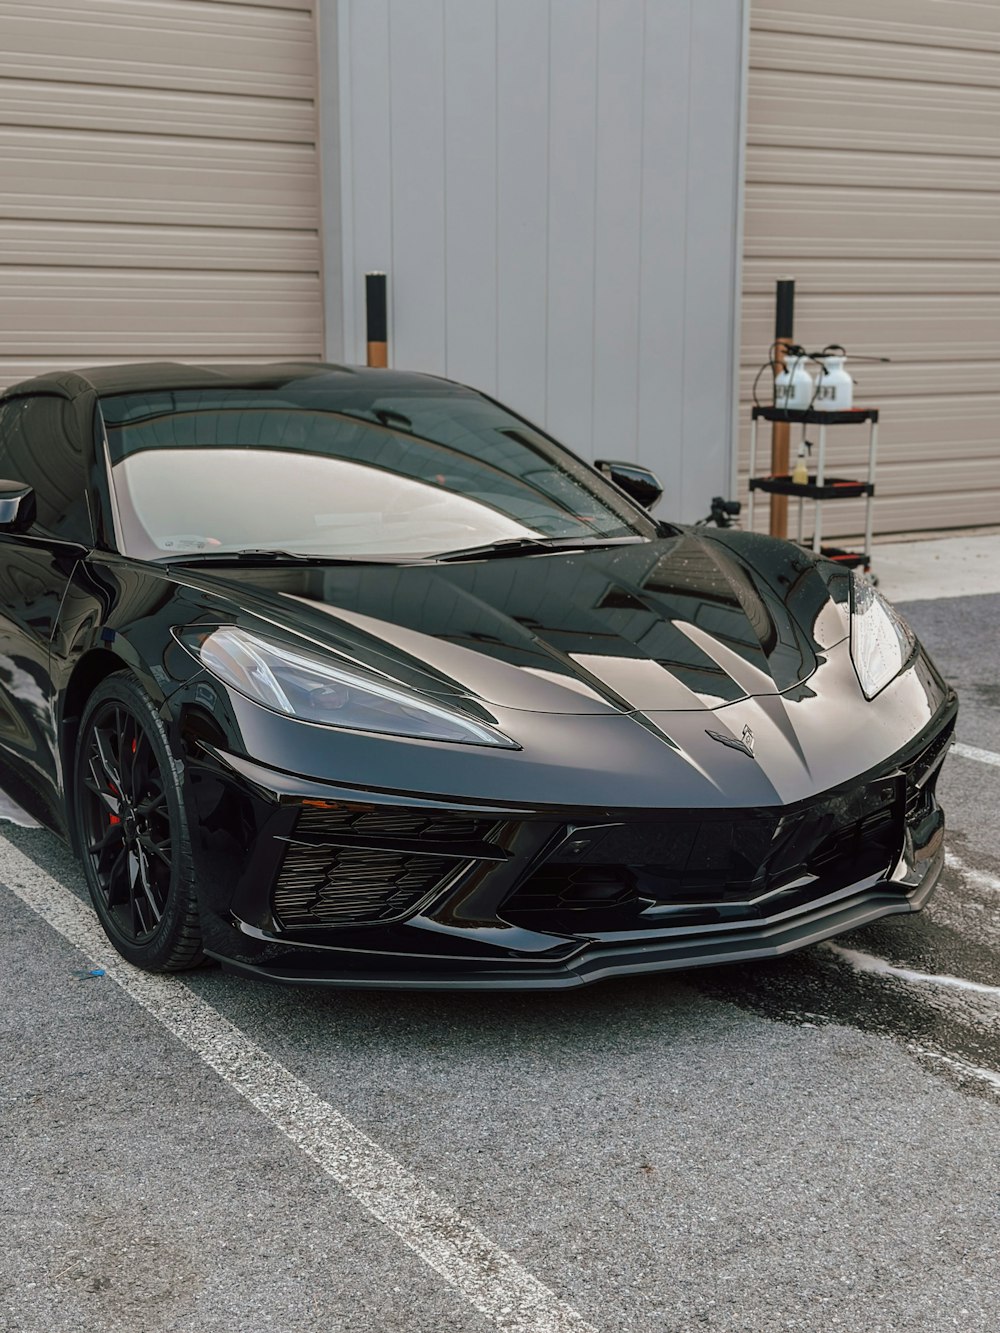 a black sports car parked in a parking lot